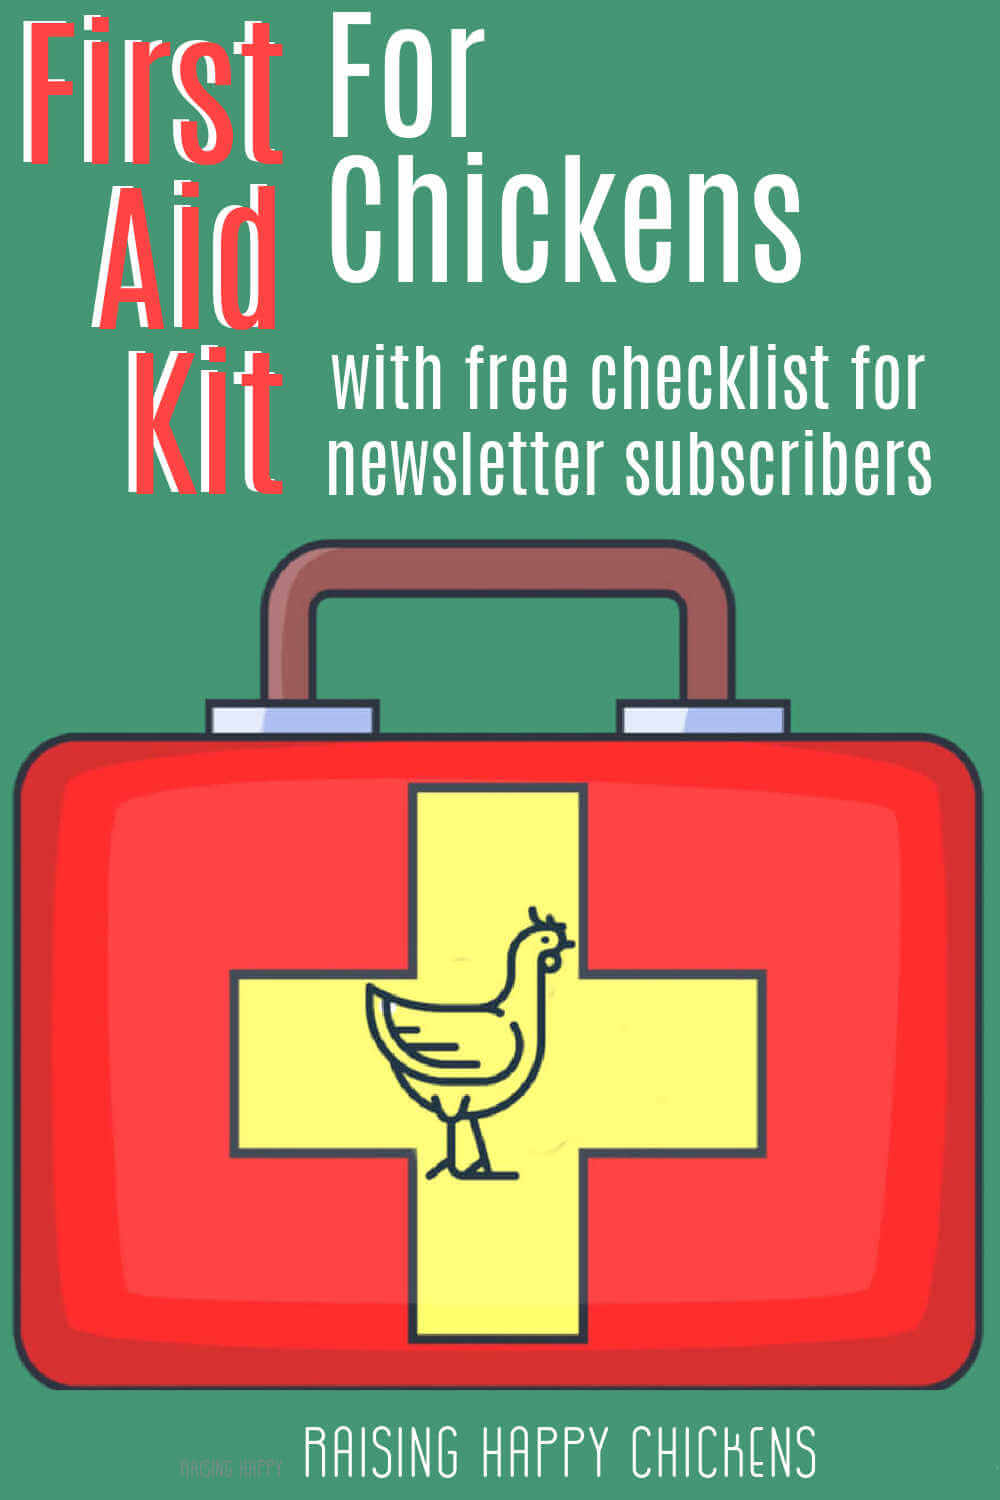 First Aid Kit Essentials  What your first aid kit needs to include